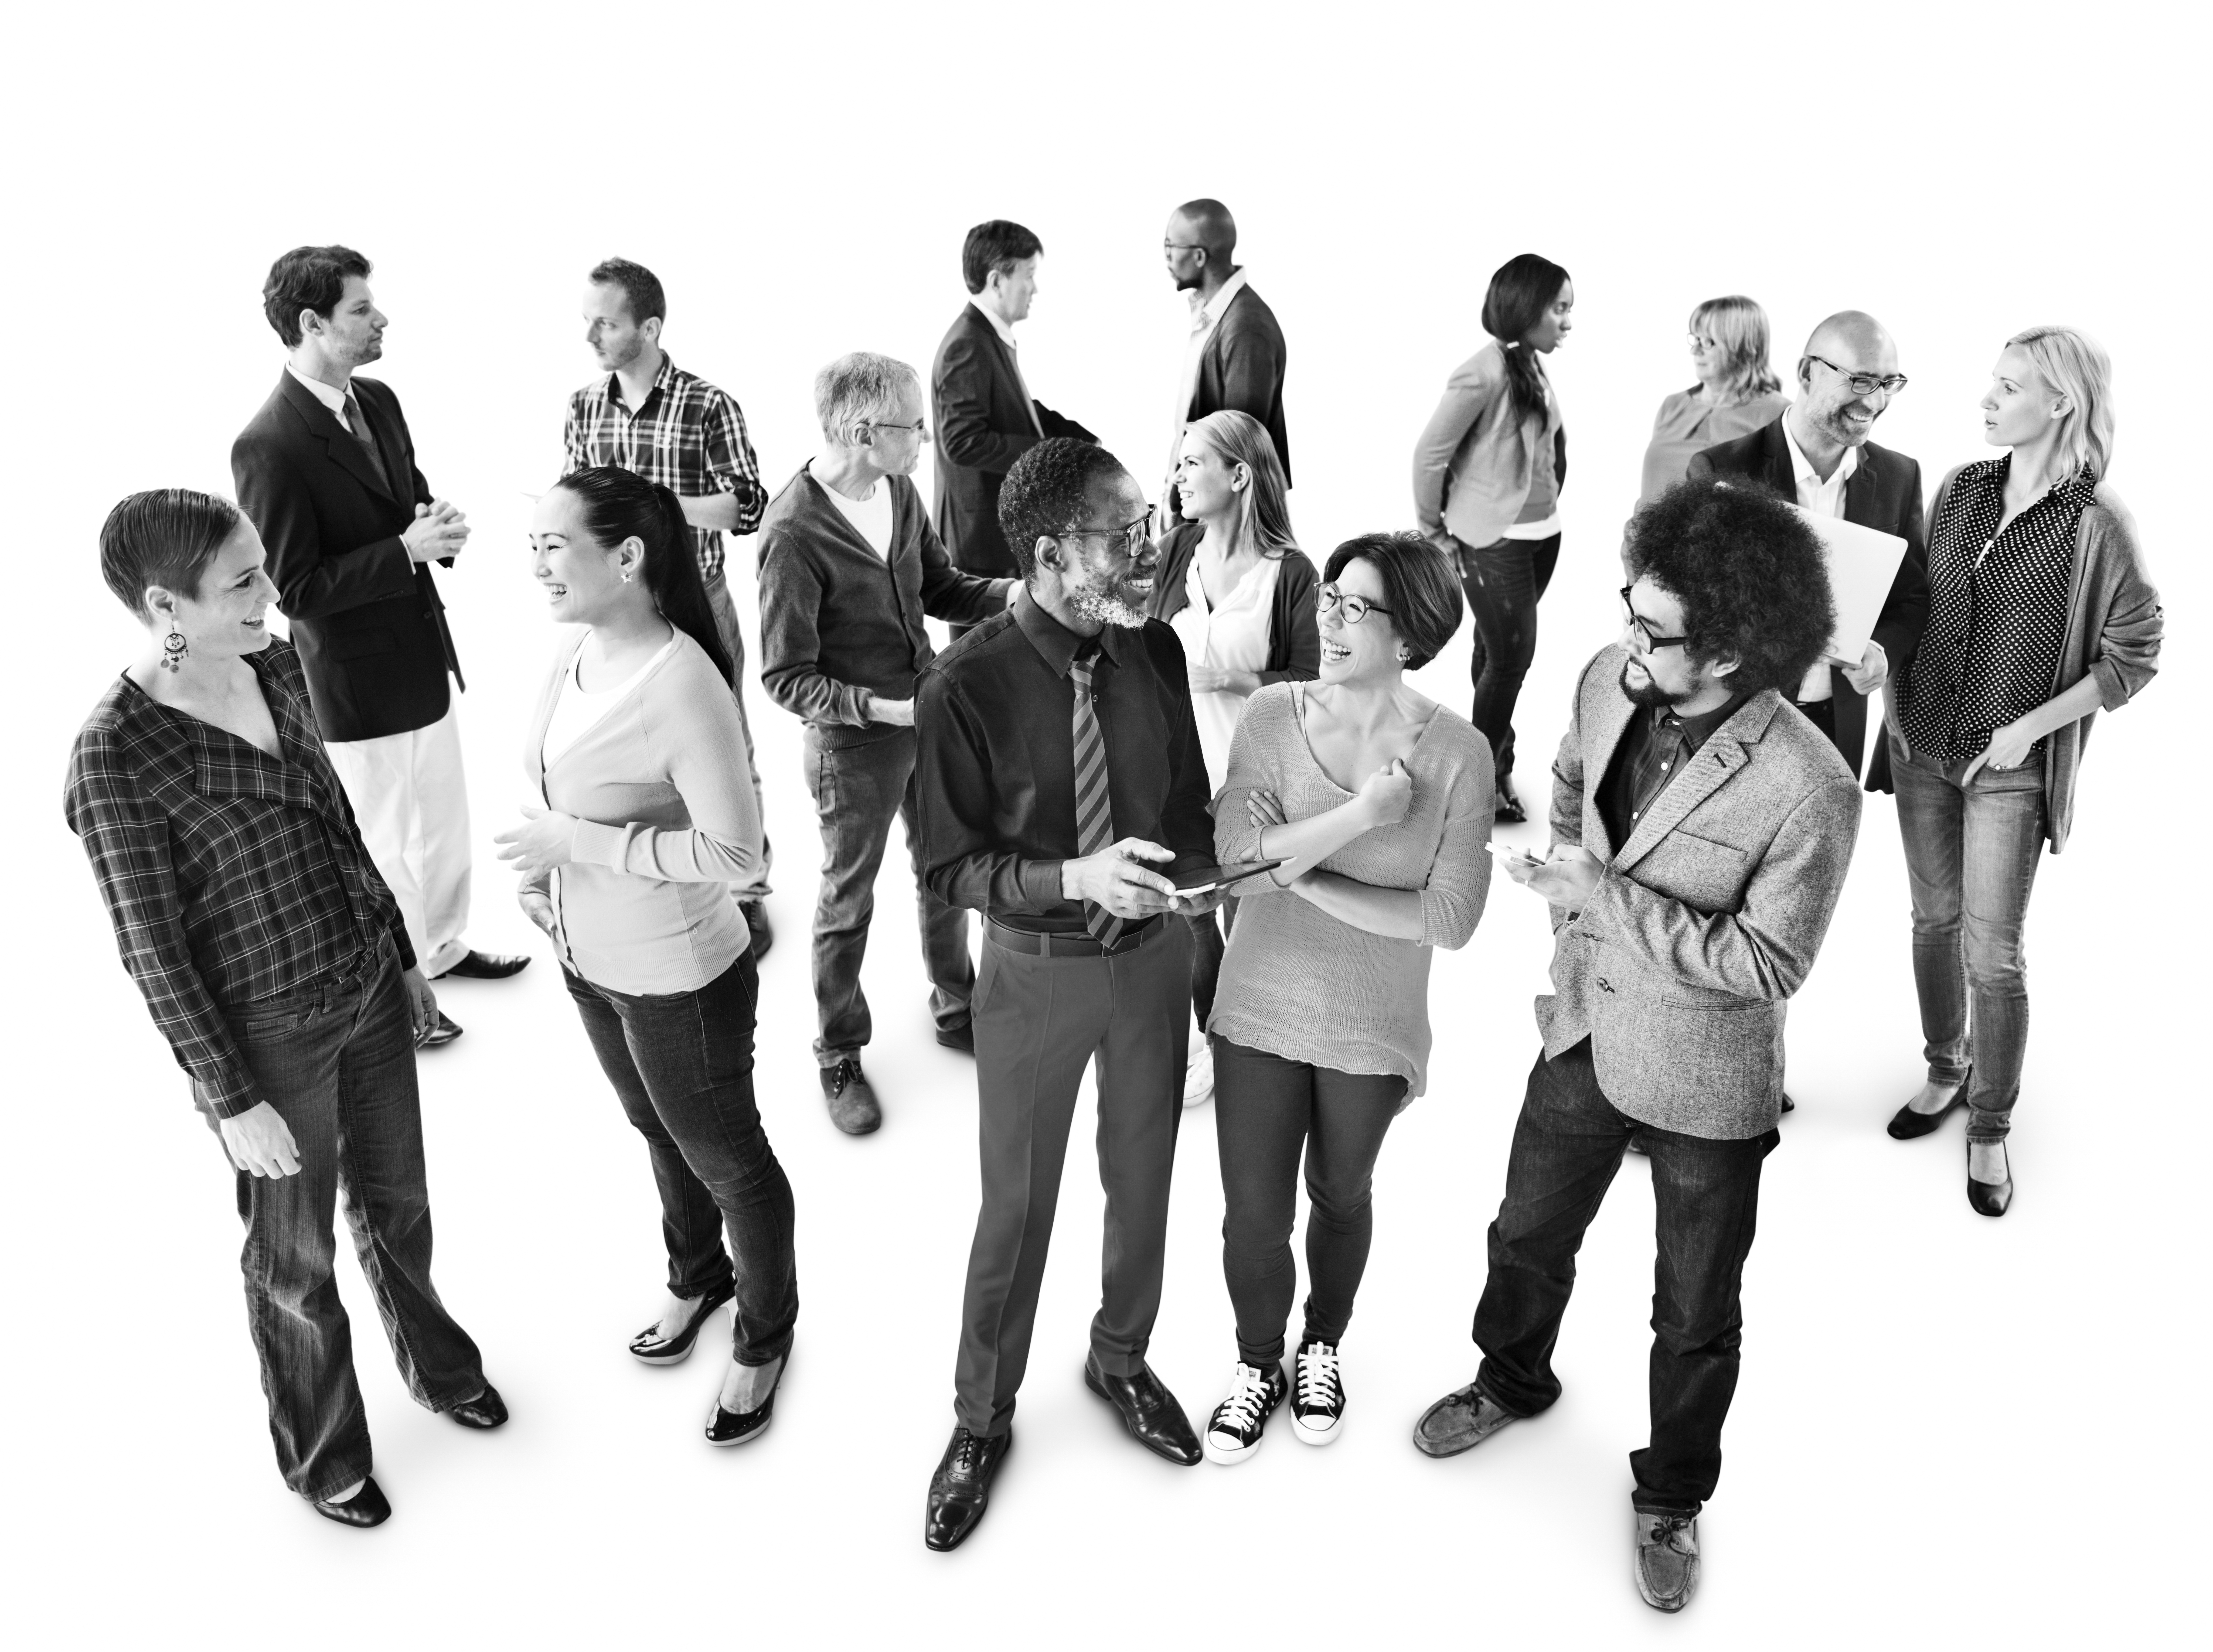 Group of Multiethnic Business People Networking